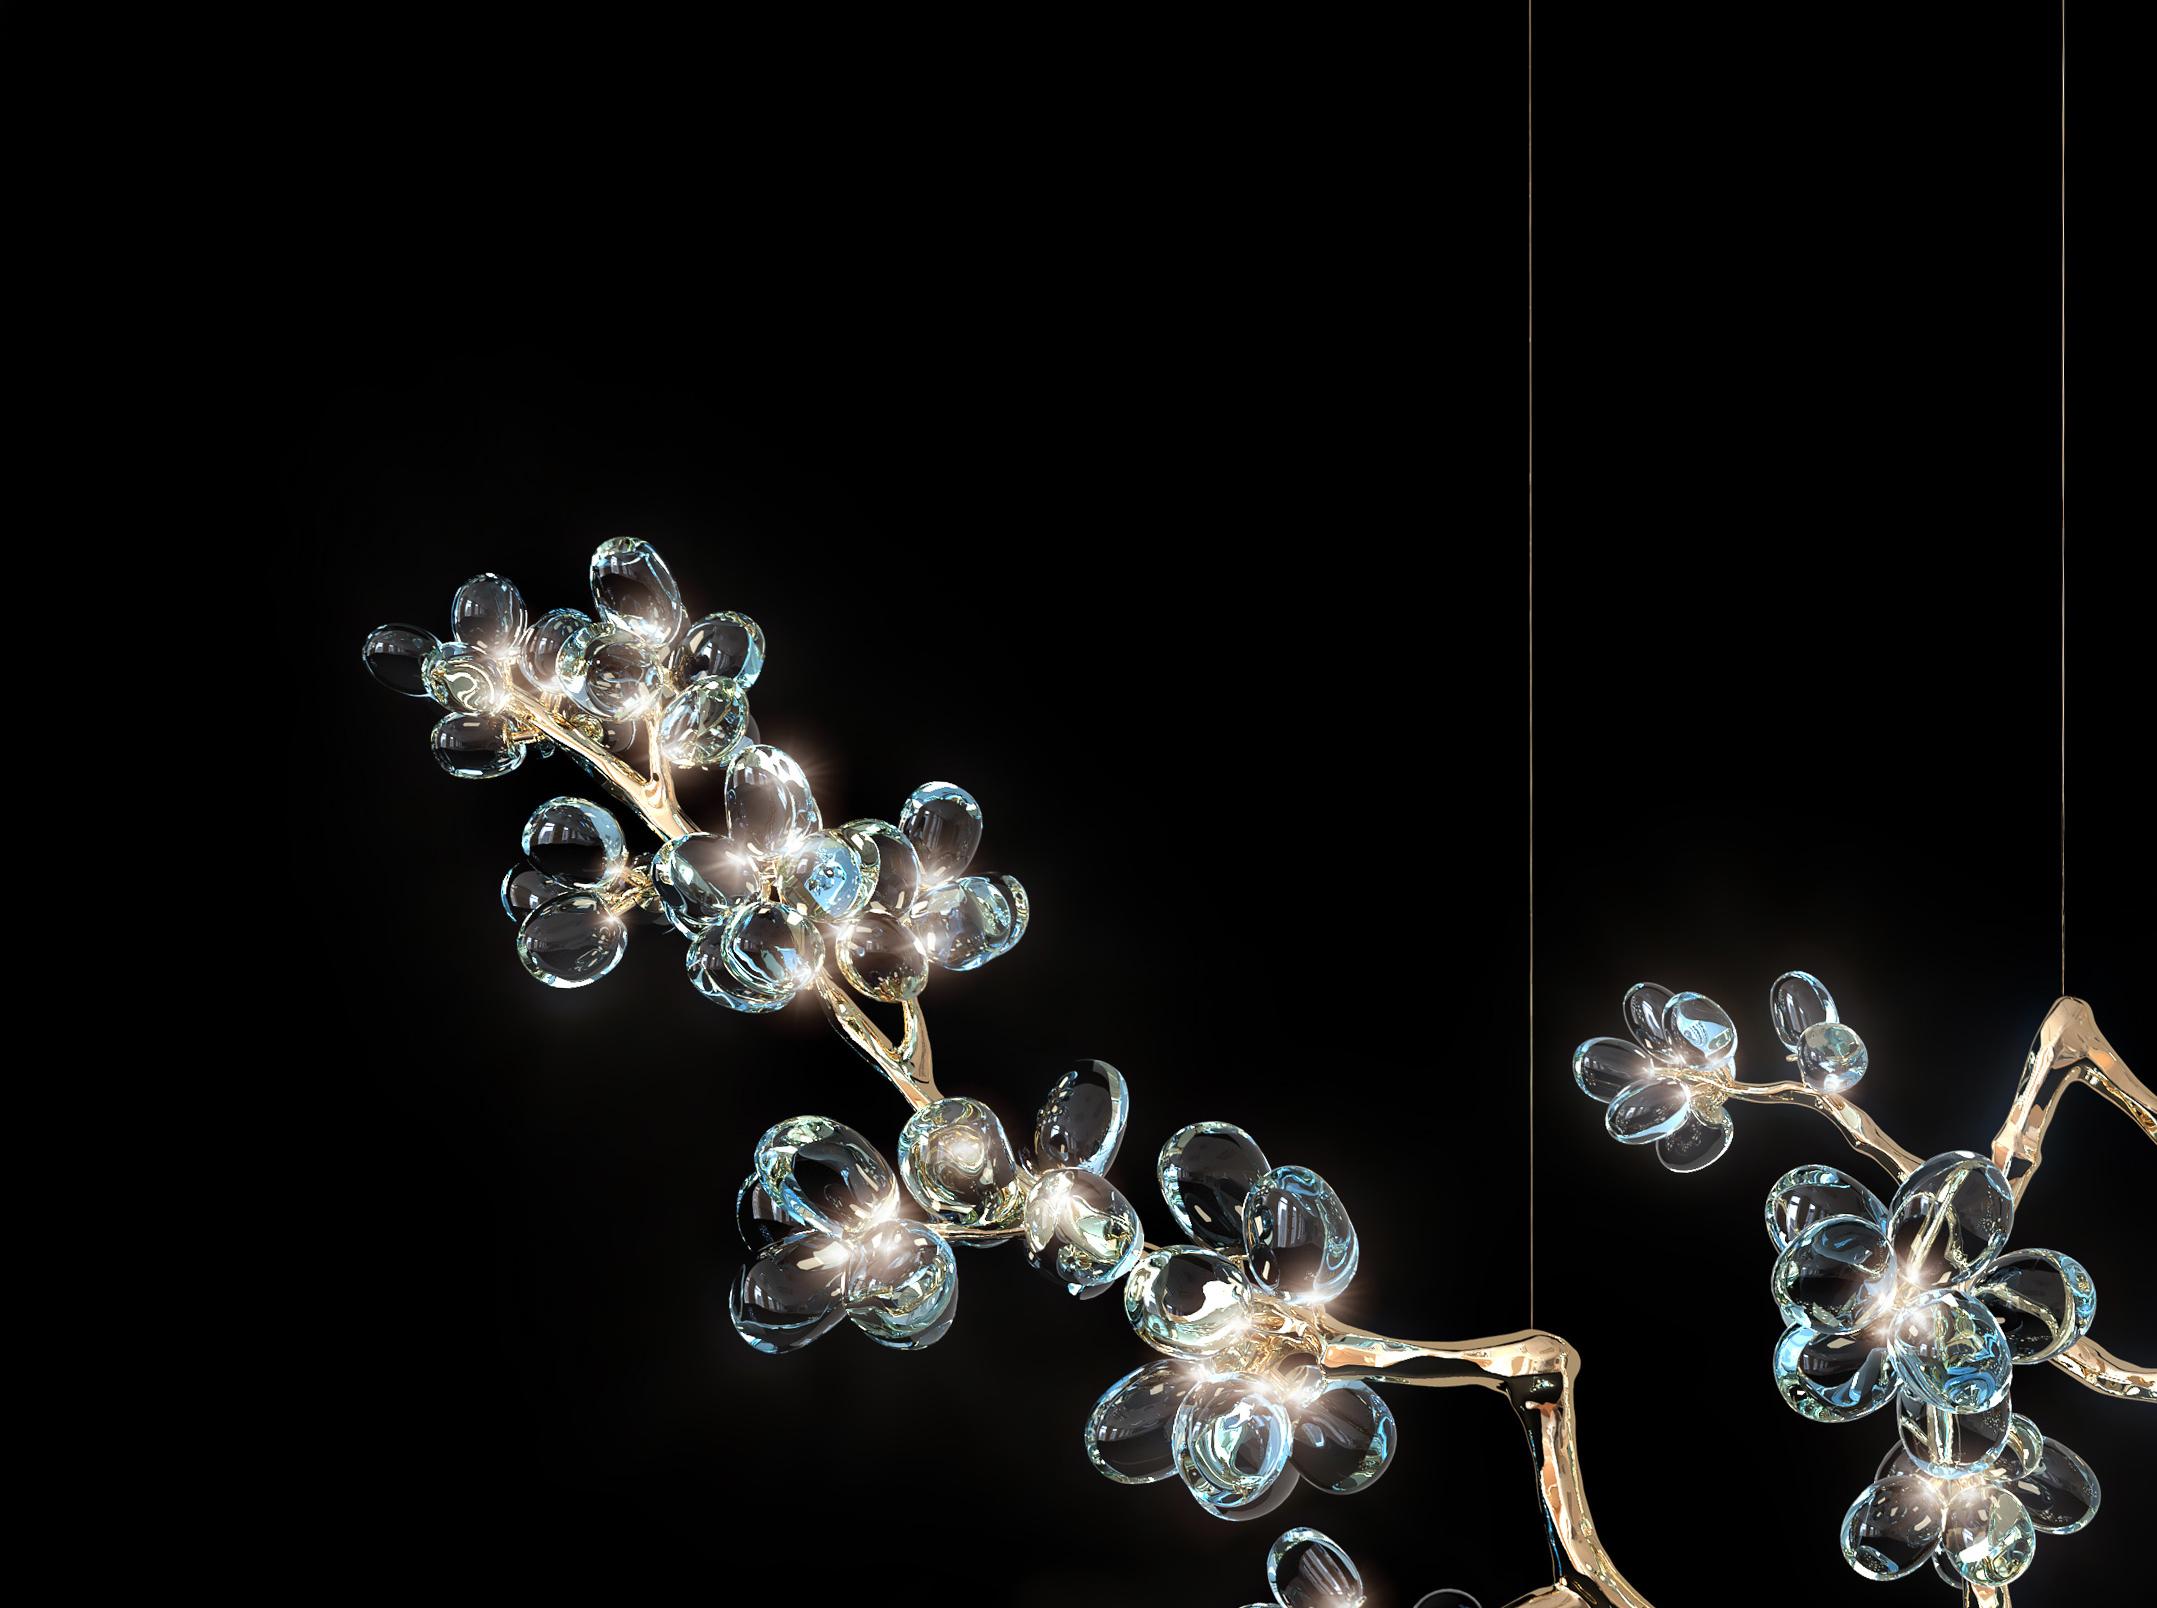 The Aomori Chandelier, Barlas’ latest innovation, set to make its debut in 2023. Adopting a sturdy, branch studied frame, decorated with a panoply of clear, handblown Murano glass globes. Available in custom sizes and finishes.